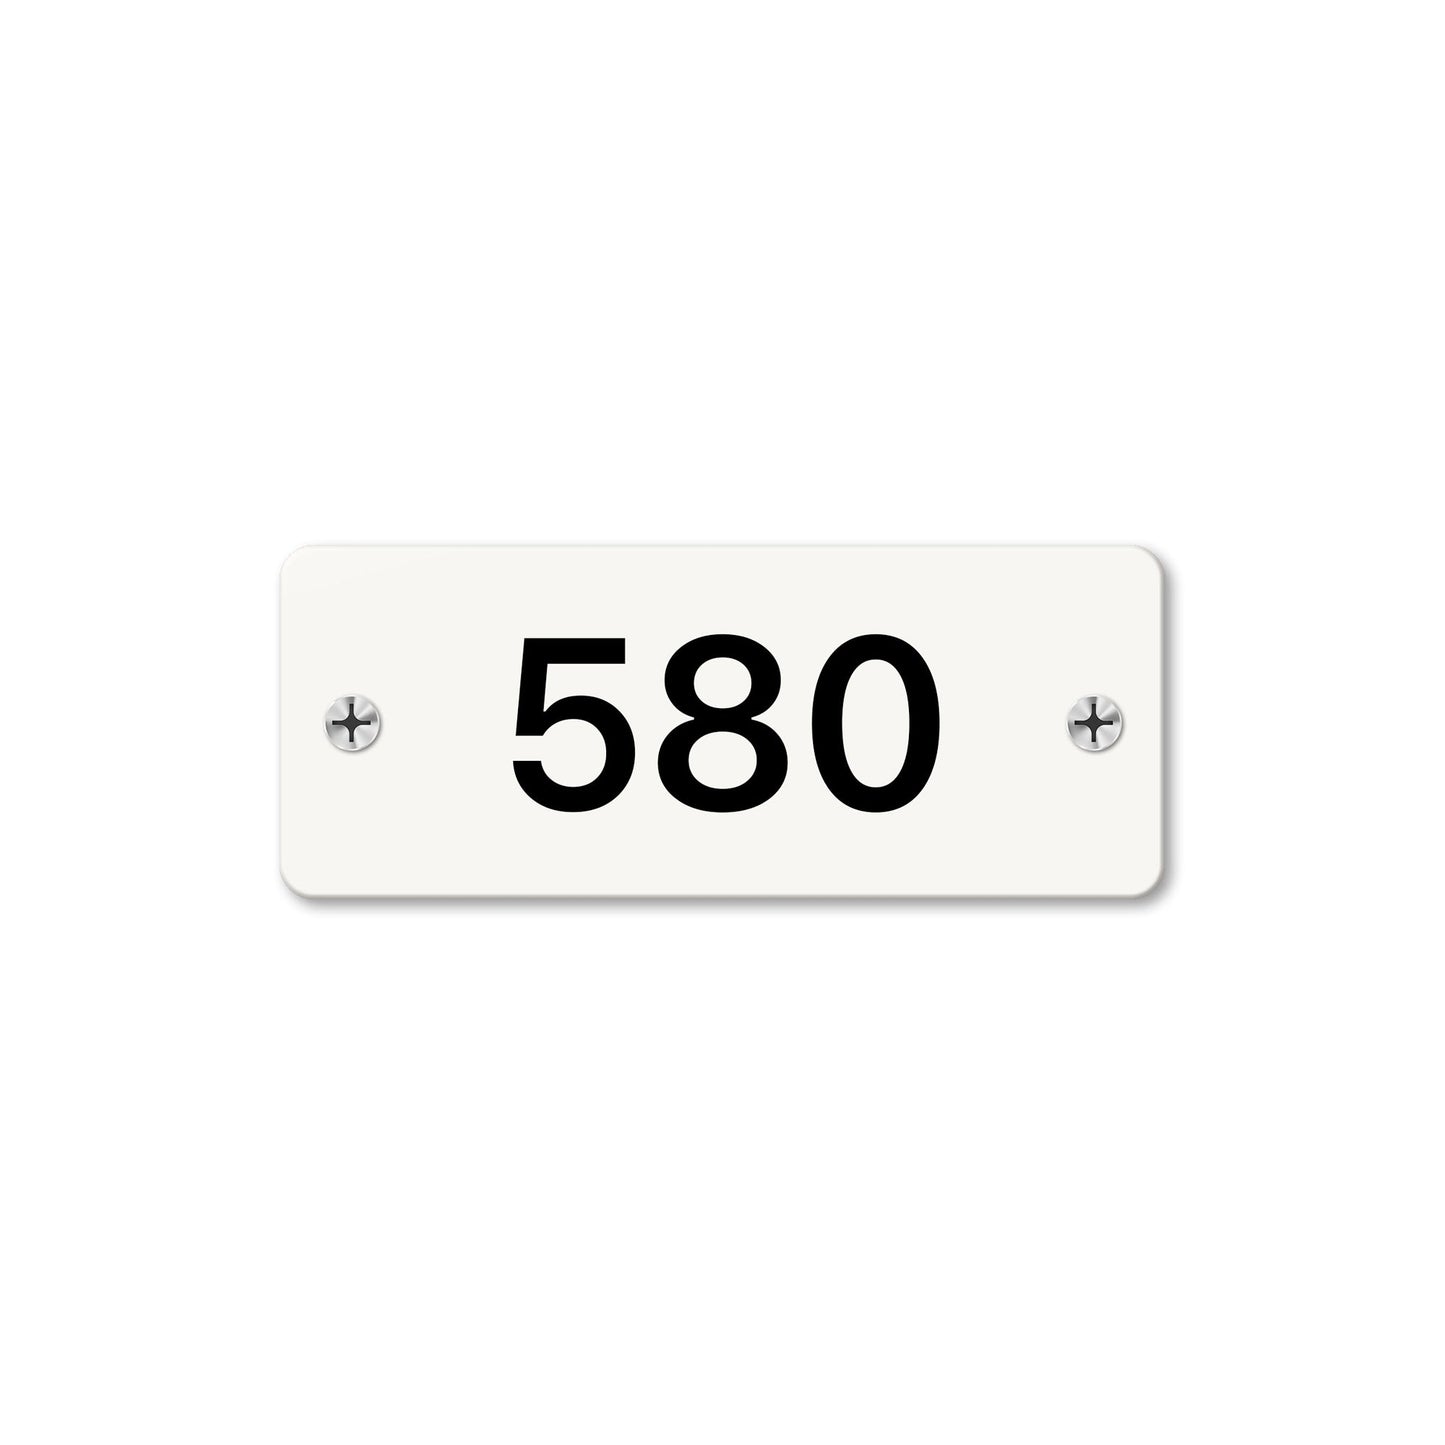 Numeral 580